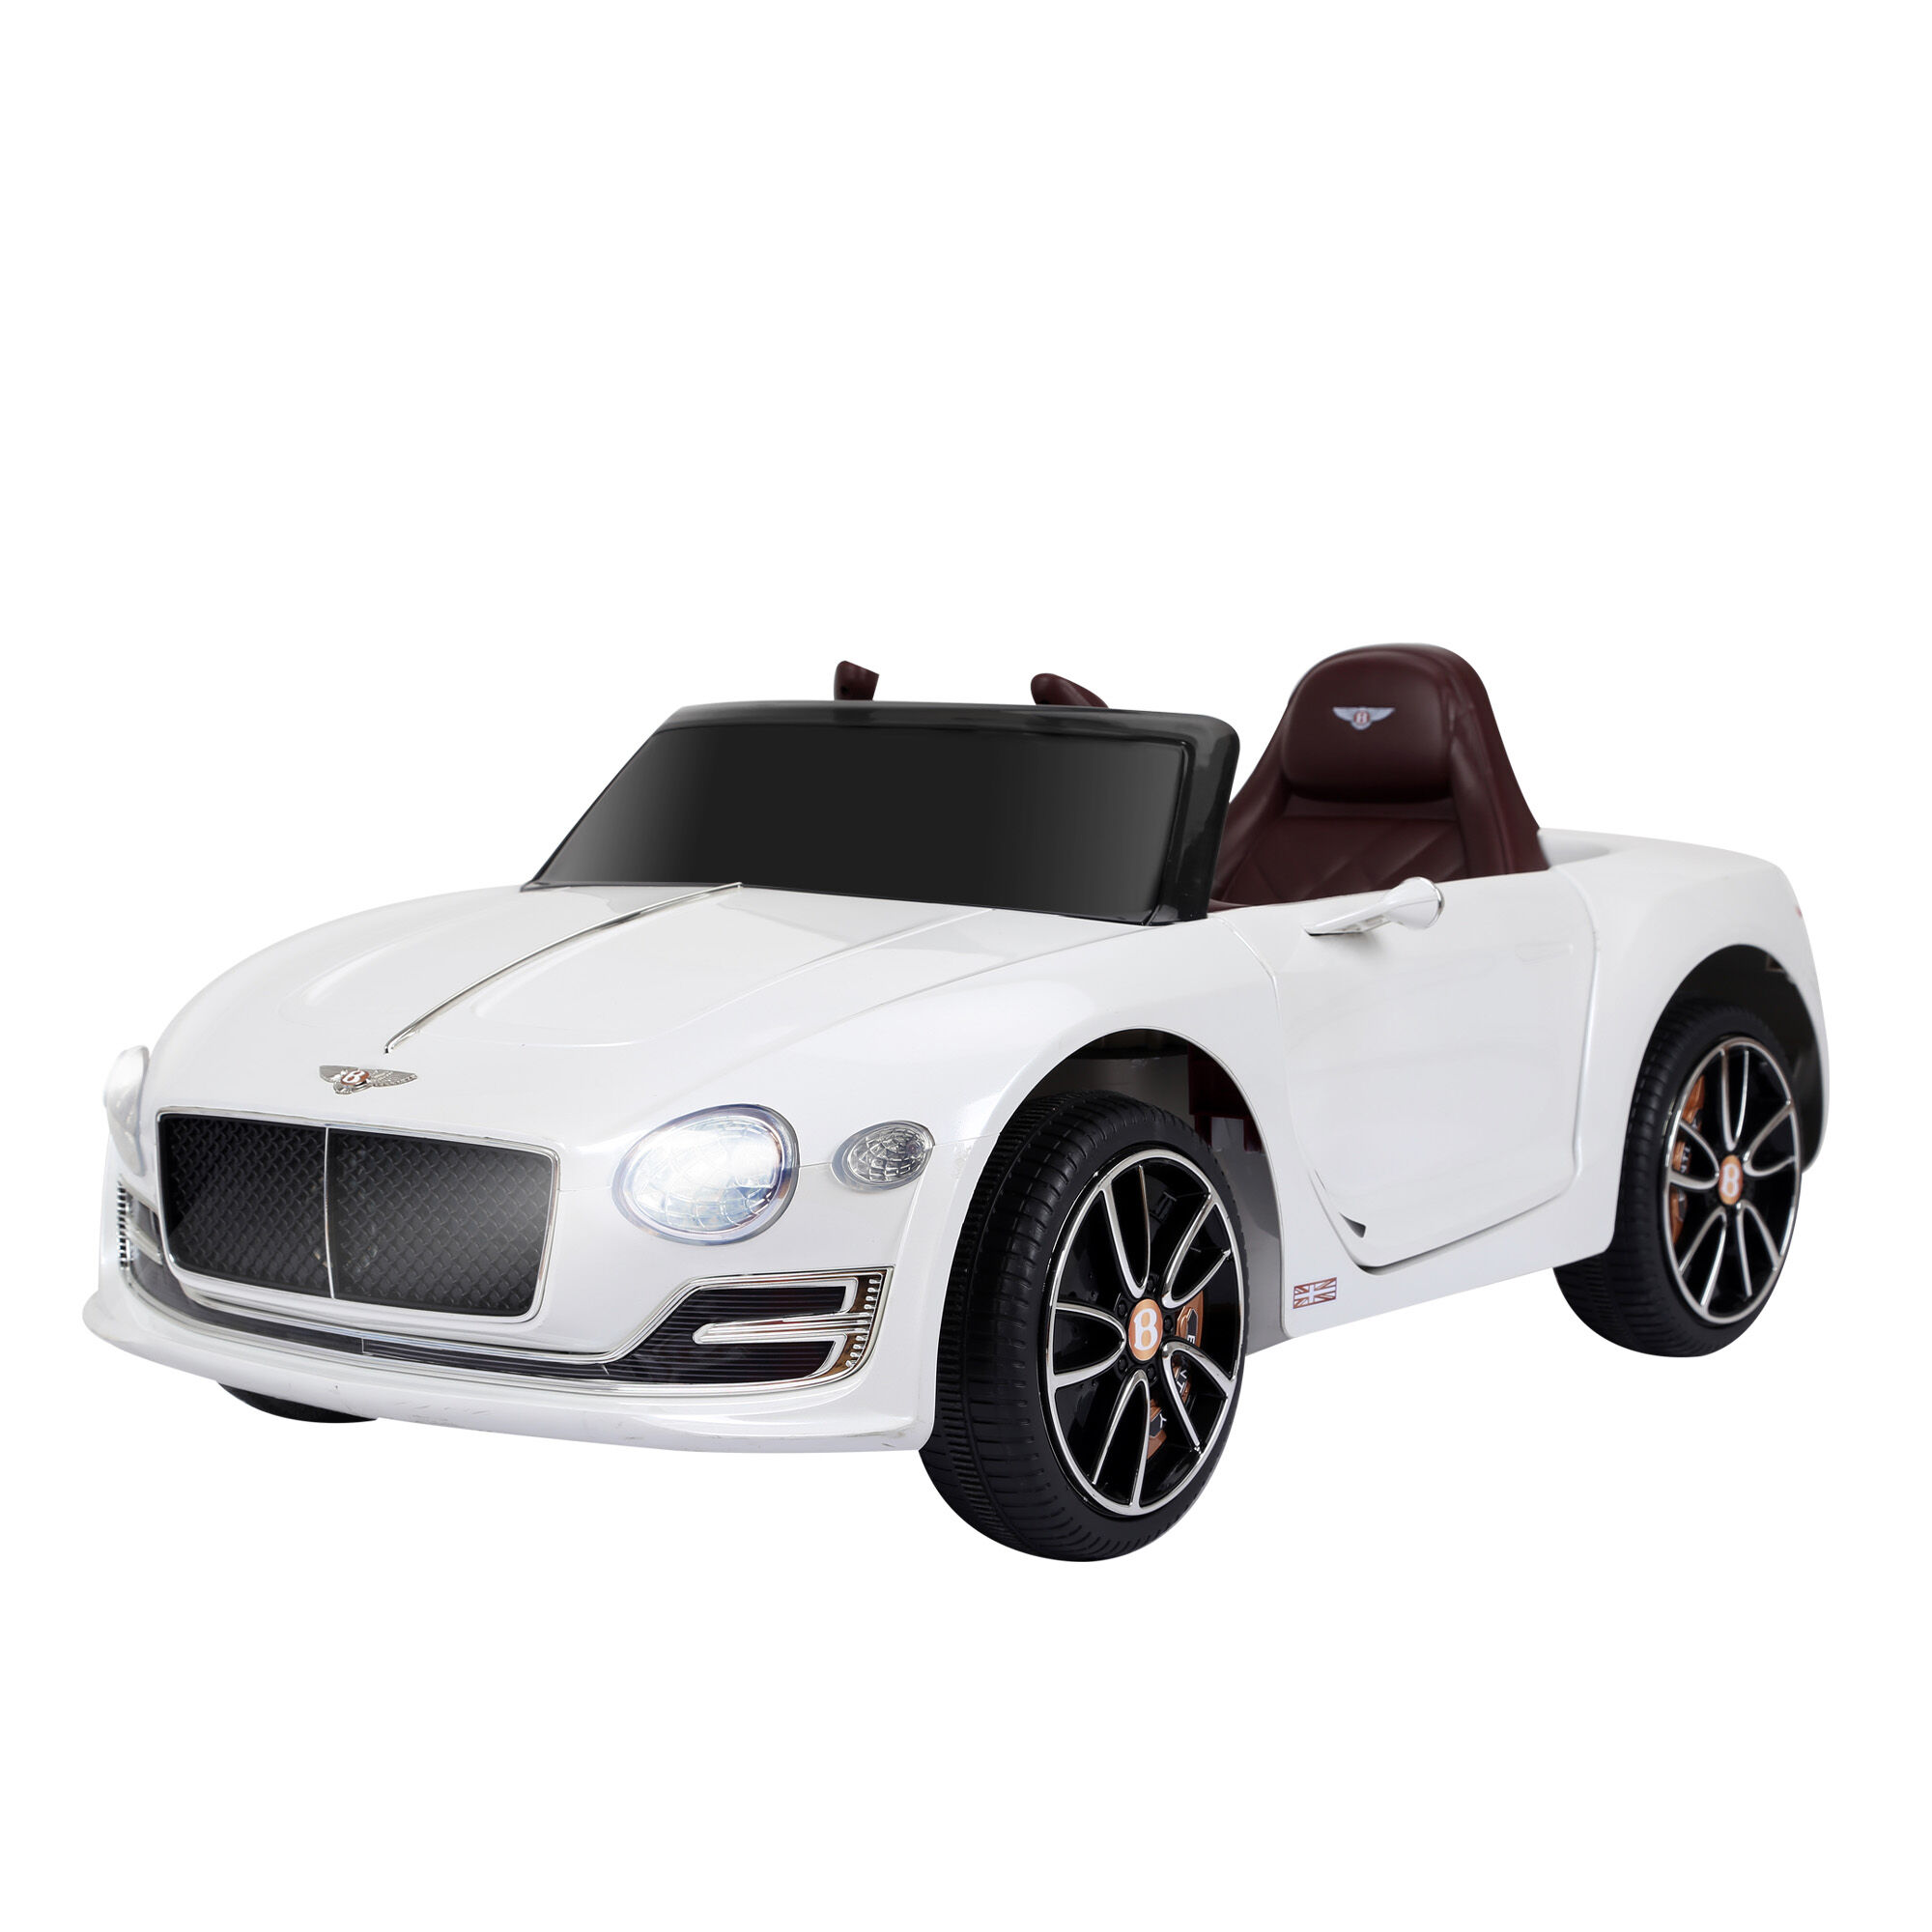 Aosom Licensed Bentley GT 12V Electric Kids Ride On Car Toy with Parent Remote Control White   Aosom.com